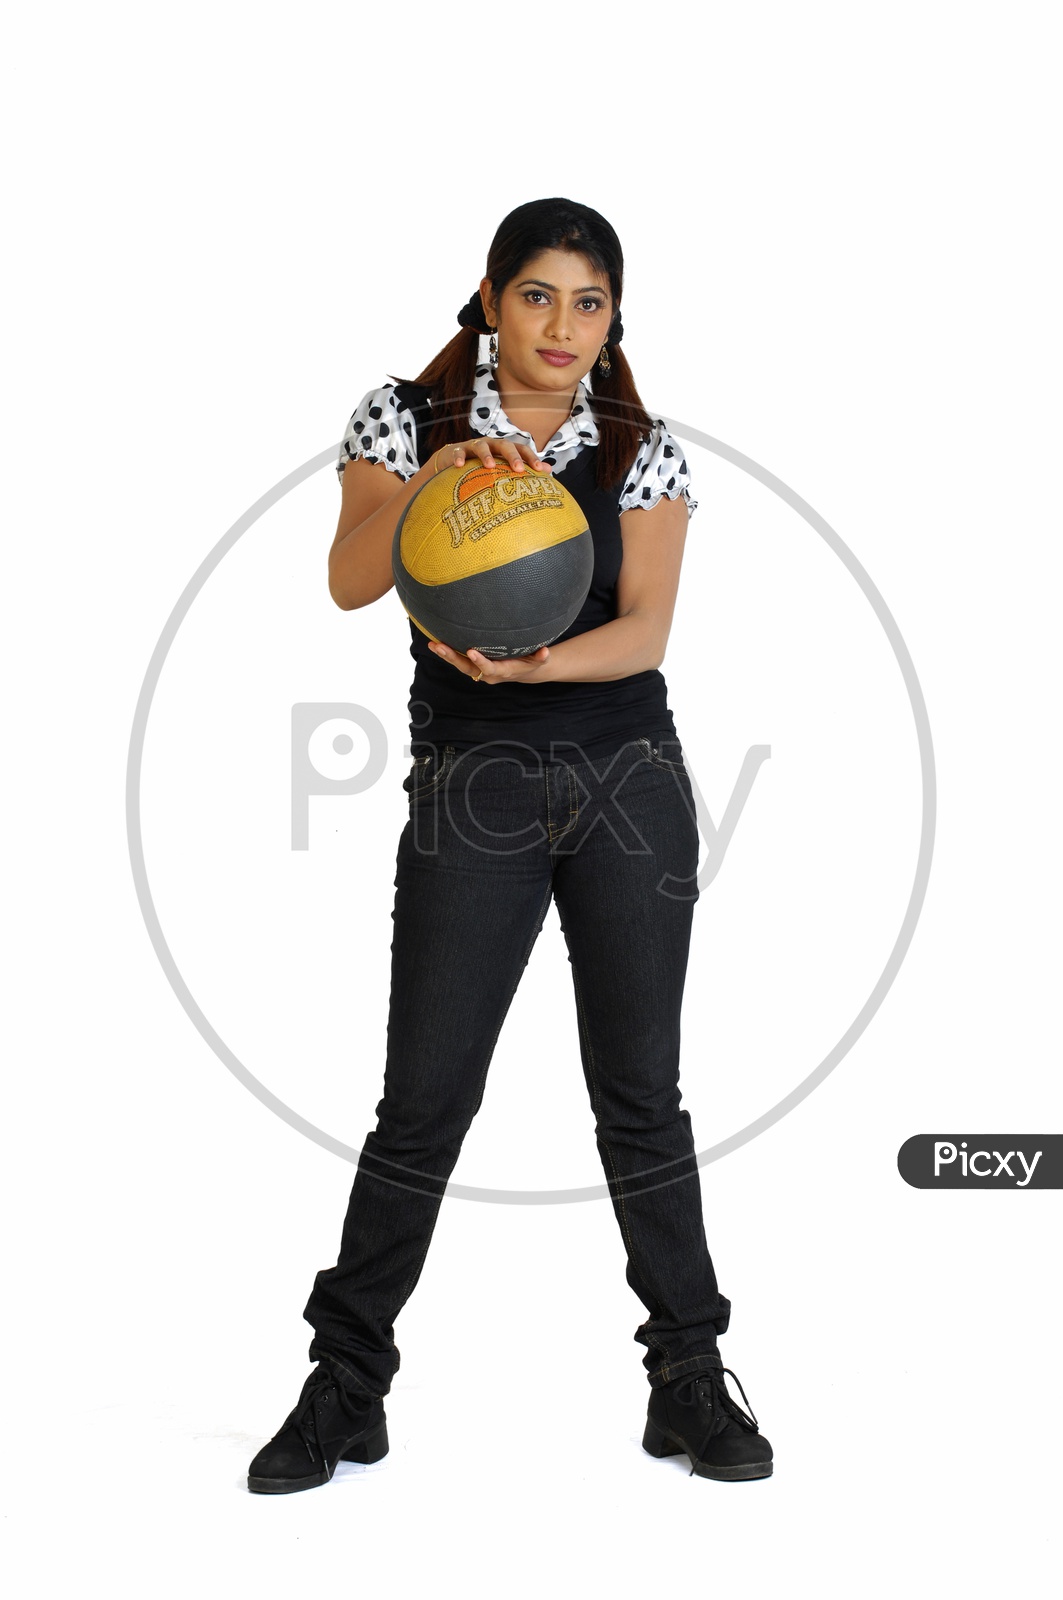 Indian Woman holding a throw ball